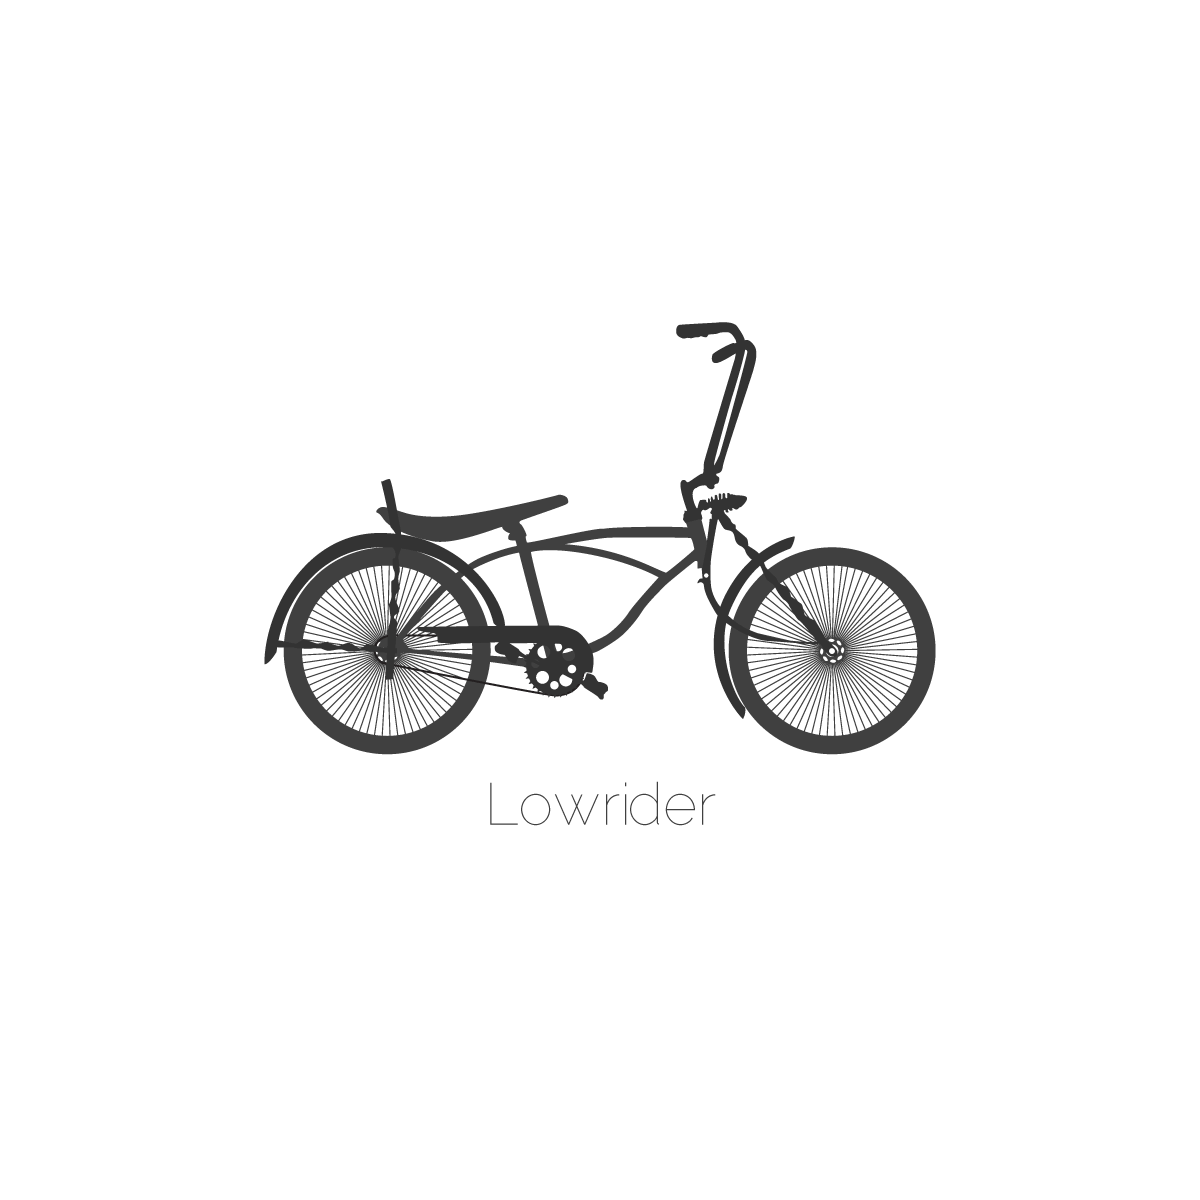 Vector Illustration of a low rider bicycle